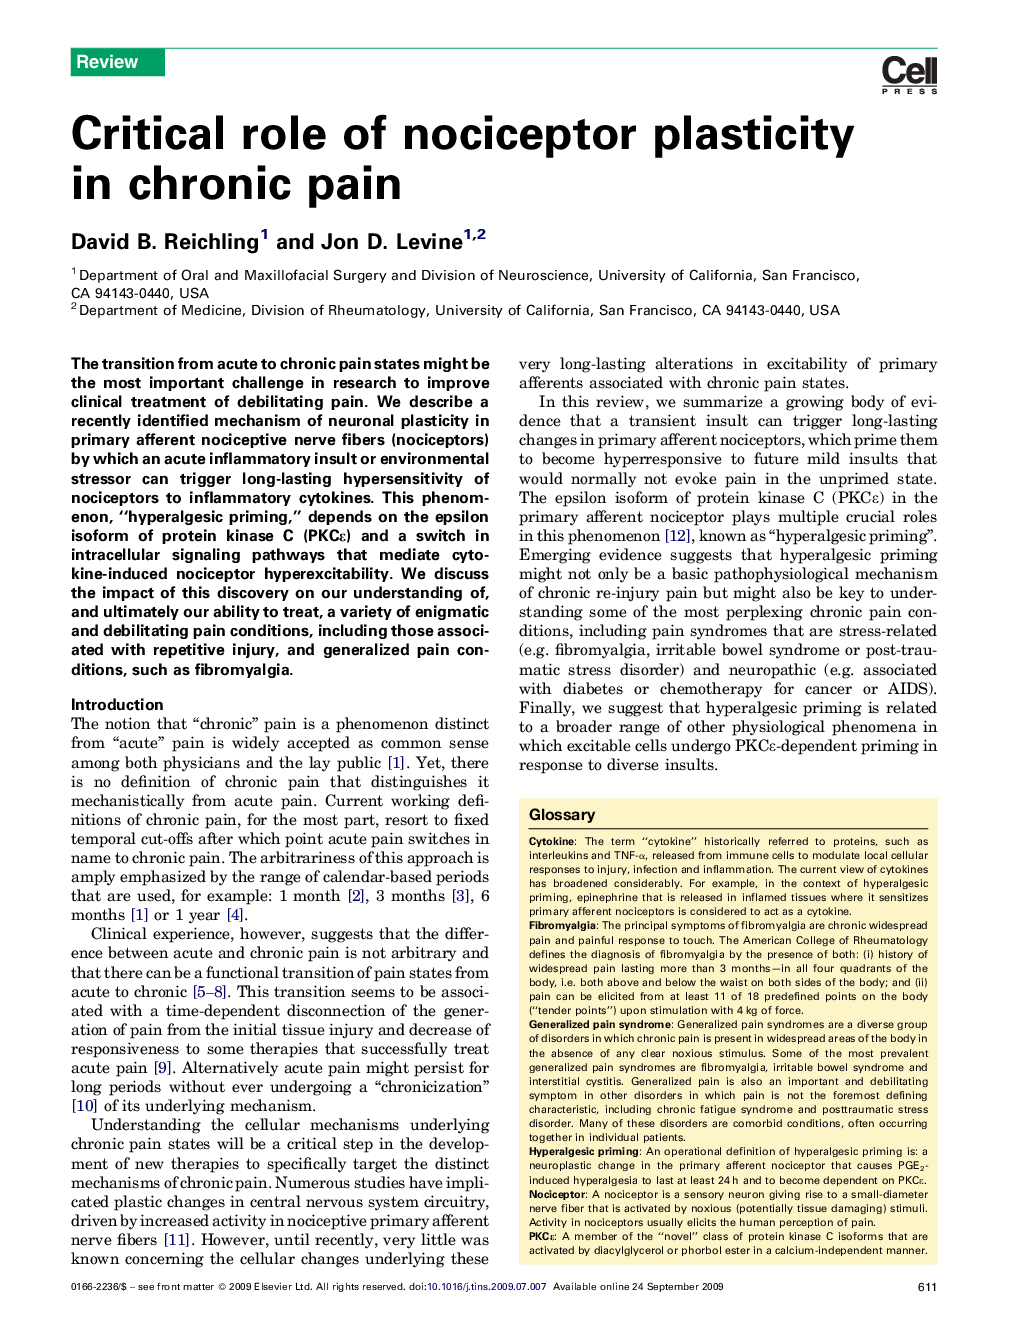 Critical role of nociceptor plasticity in chronic pain